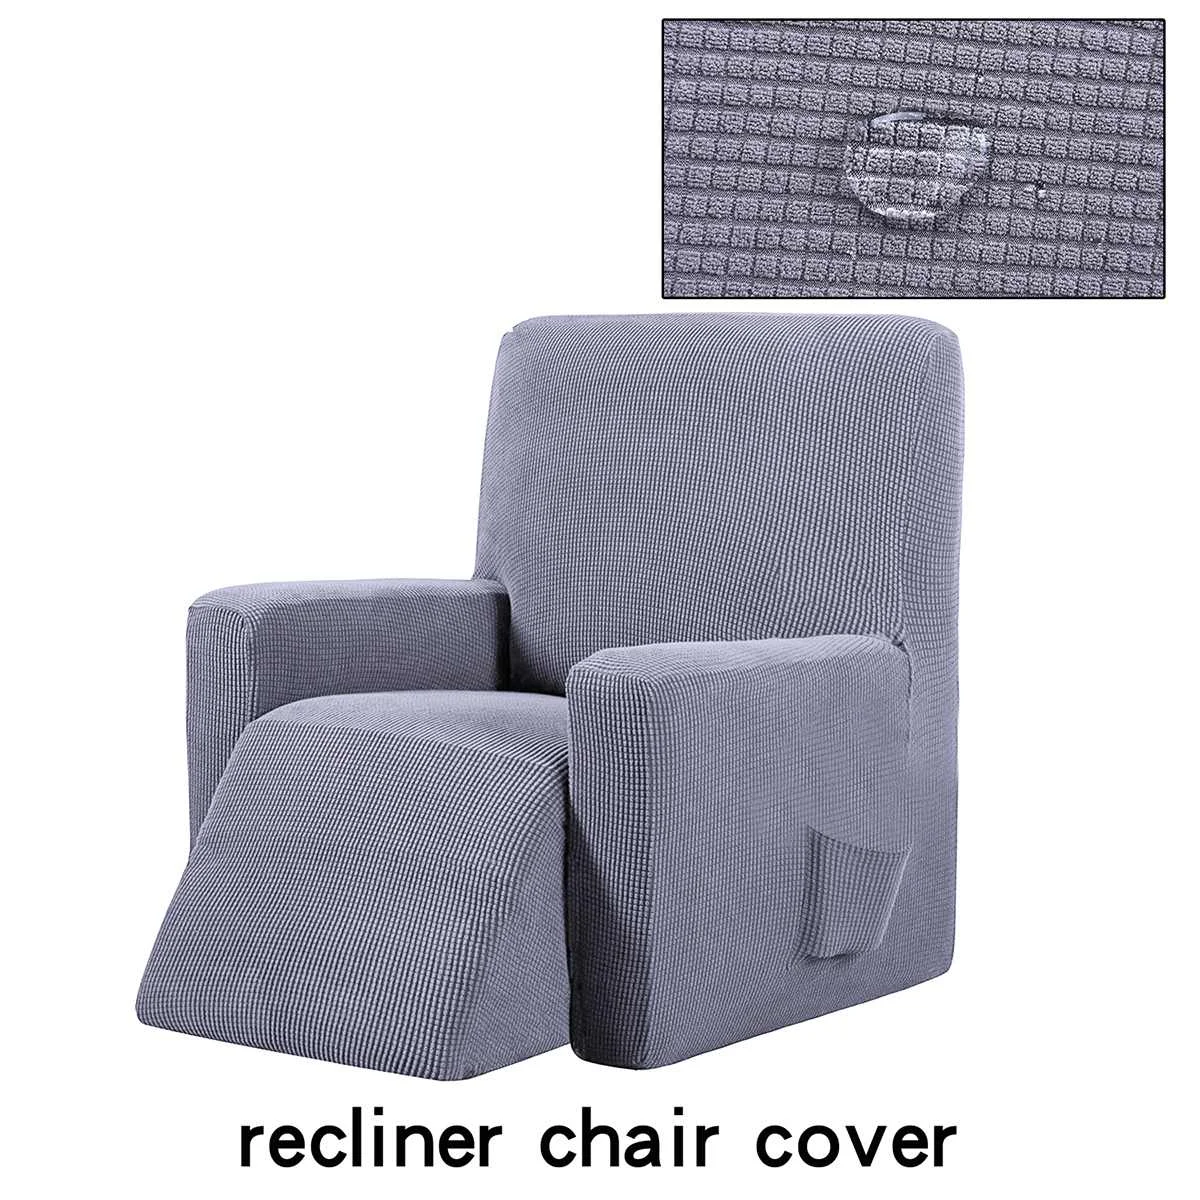 Recliner Couch Cover All-inclusive Sofa Cover Elasticity Stretch Anti-slip Furniture Slipcovers Chair Protector Single Seat Sofa - Цвет: Светло-серый